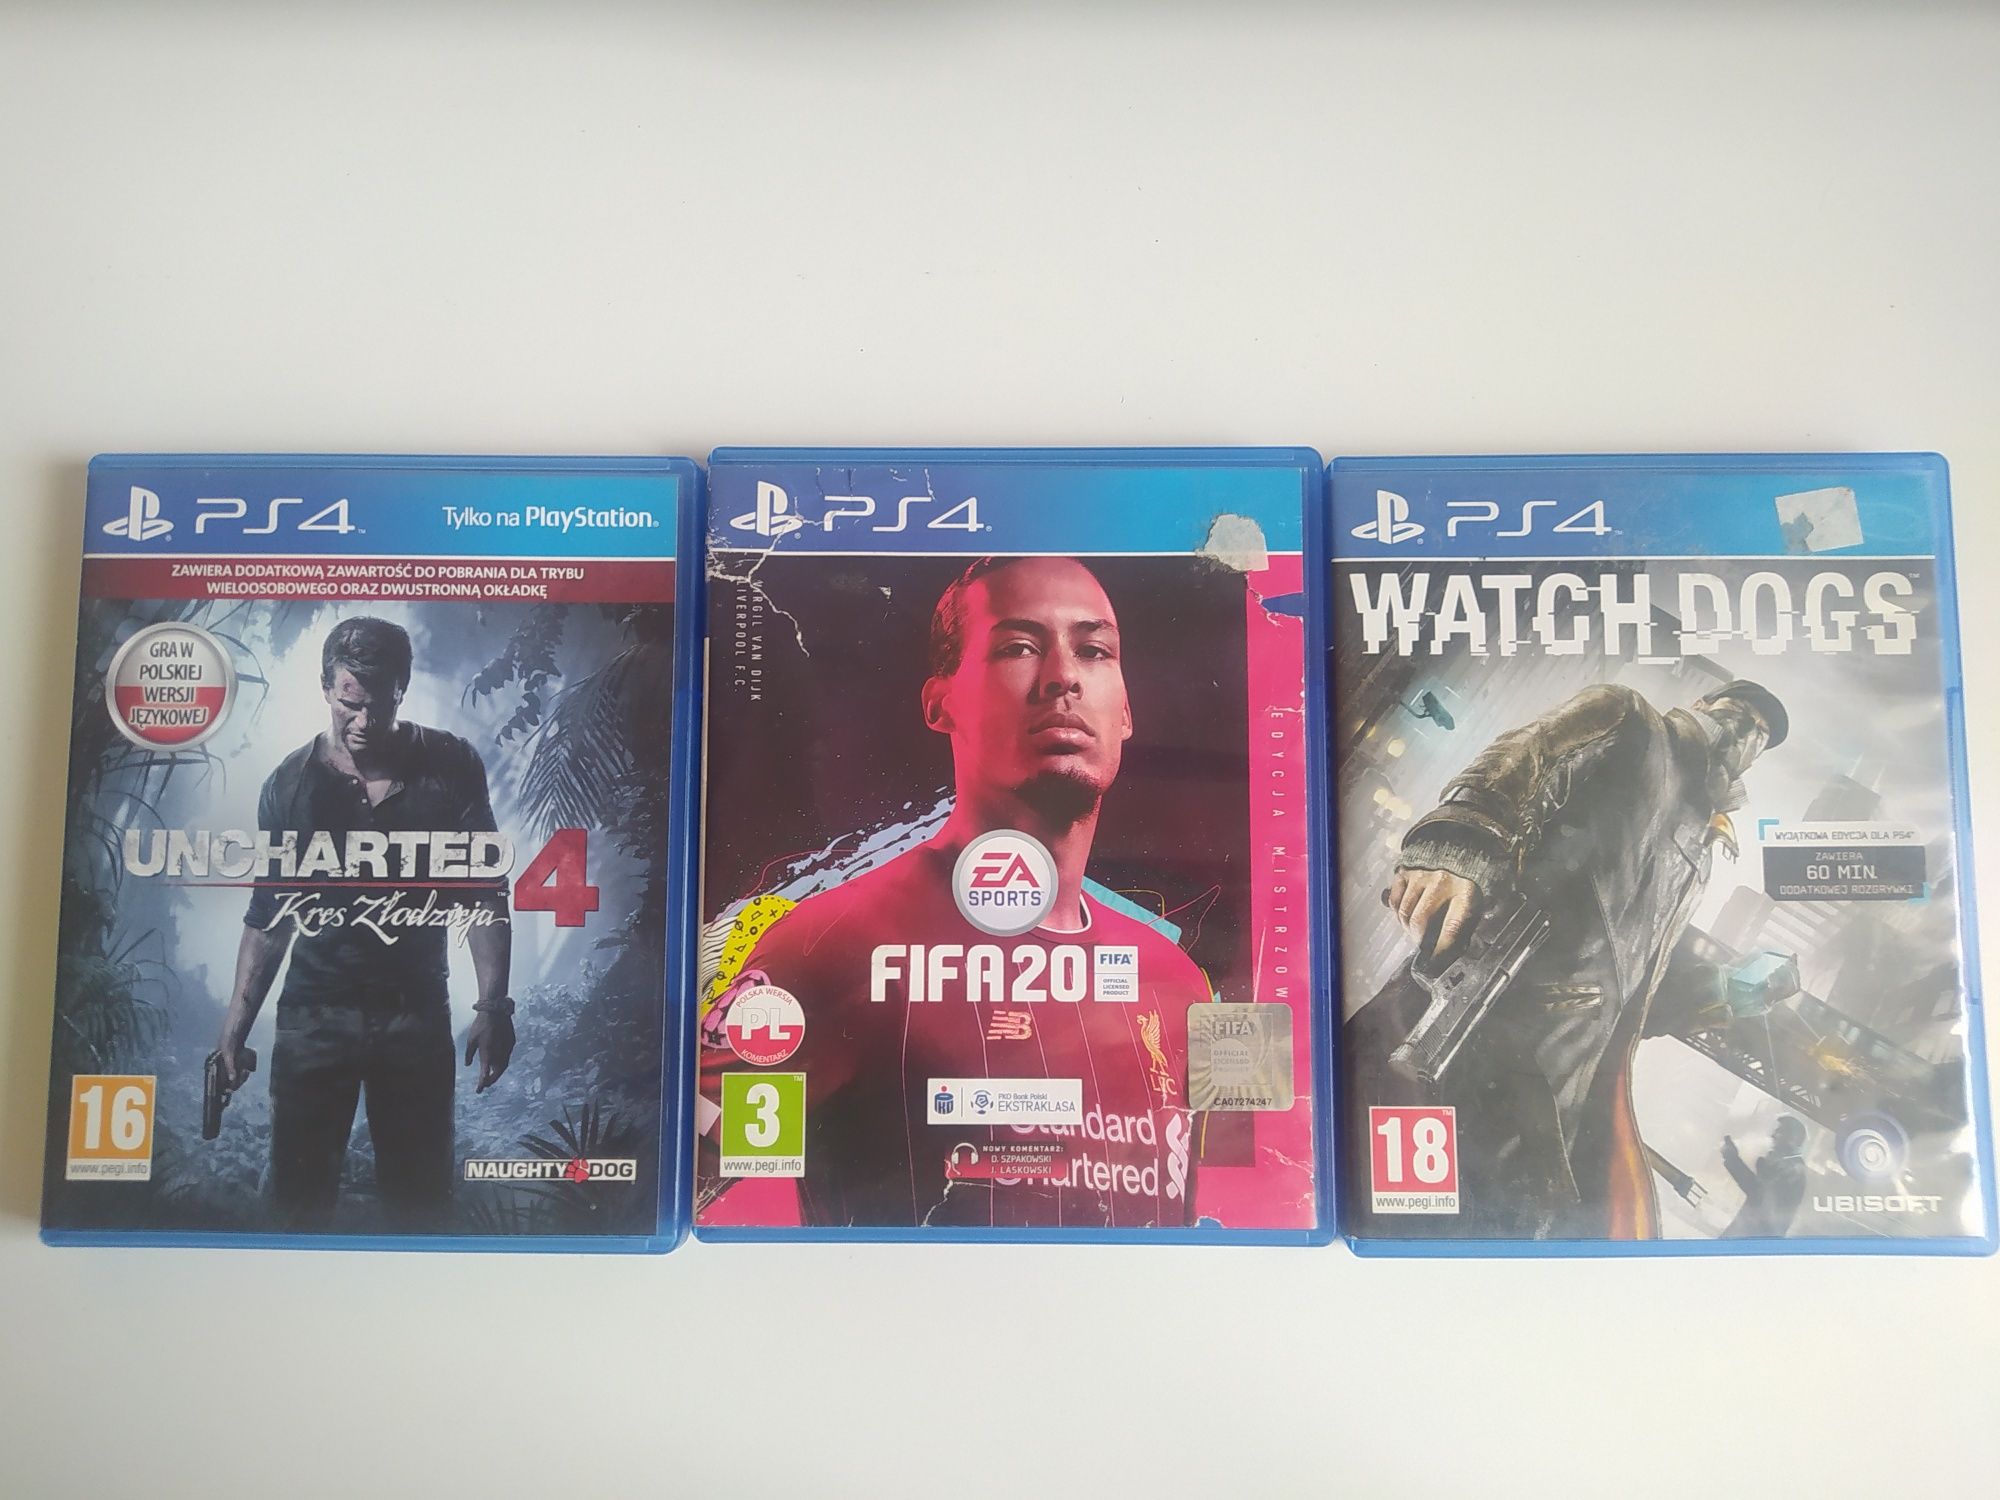 Gry na PS4: Uncharted 4, Watch Dogs i FIFA 20